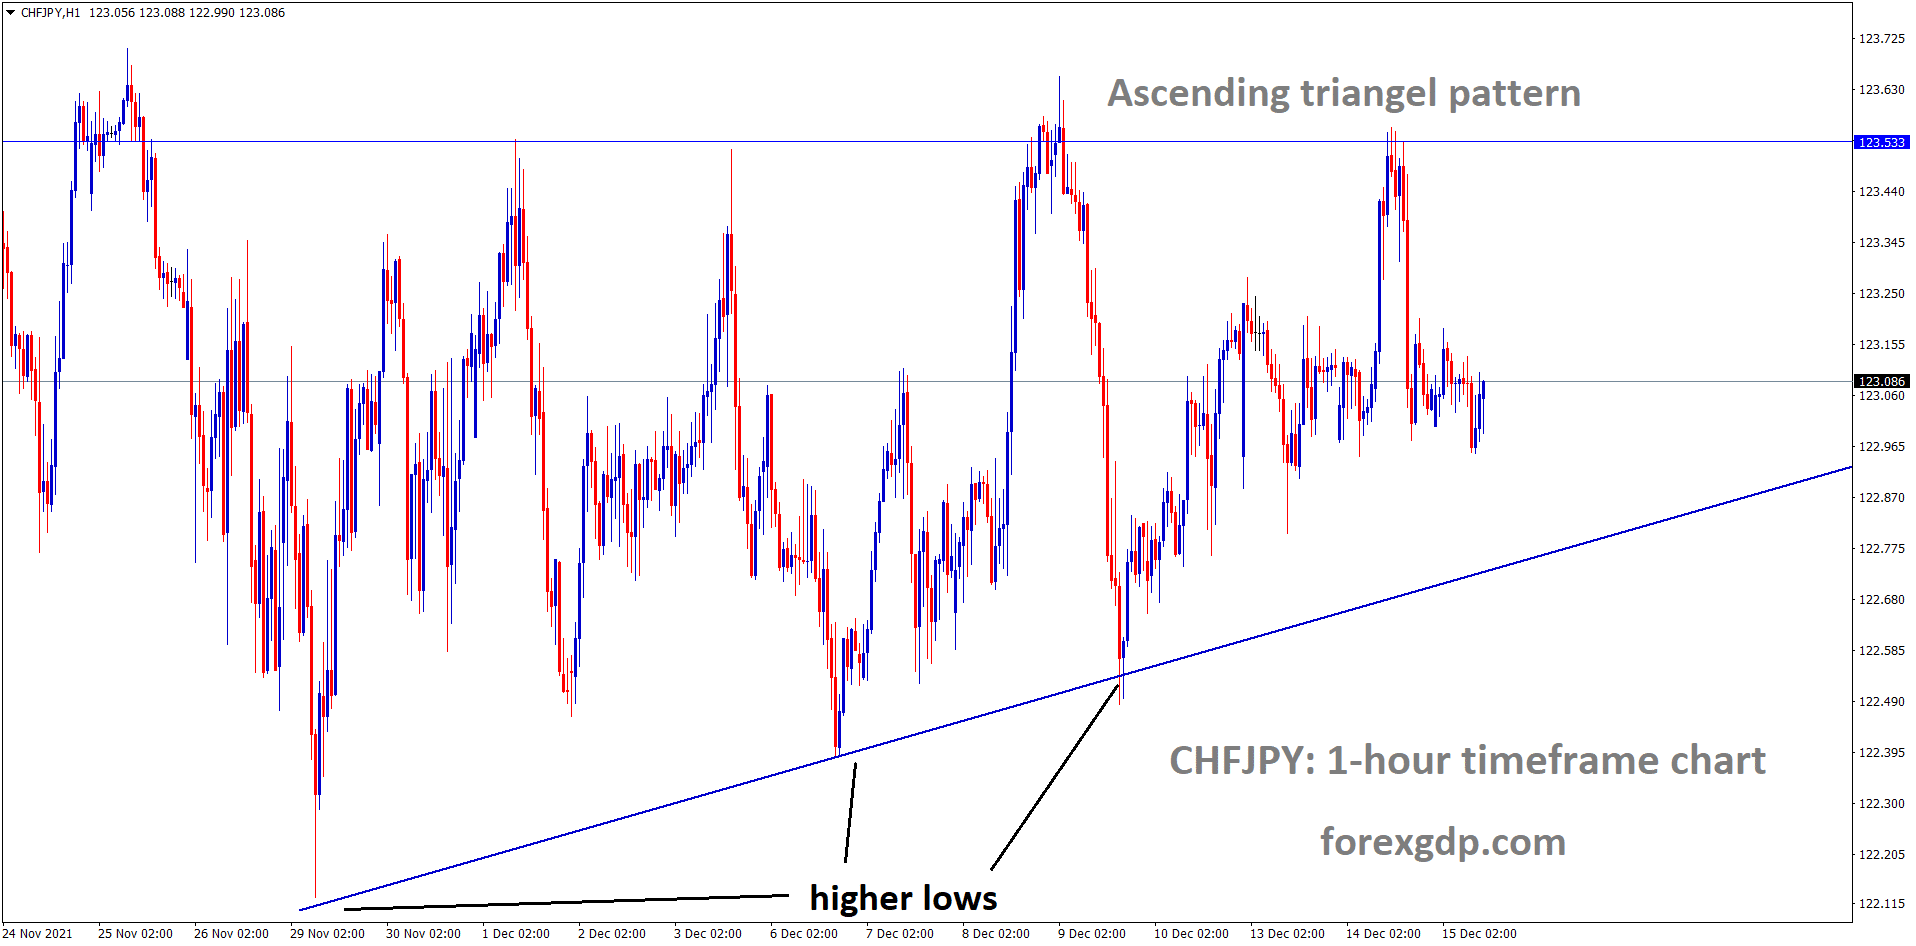 CHFJPY is moving in an ascending triangle pattern and the market fell from the top of the Triangle pattern.